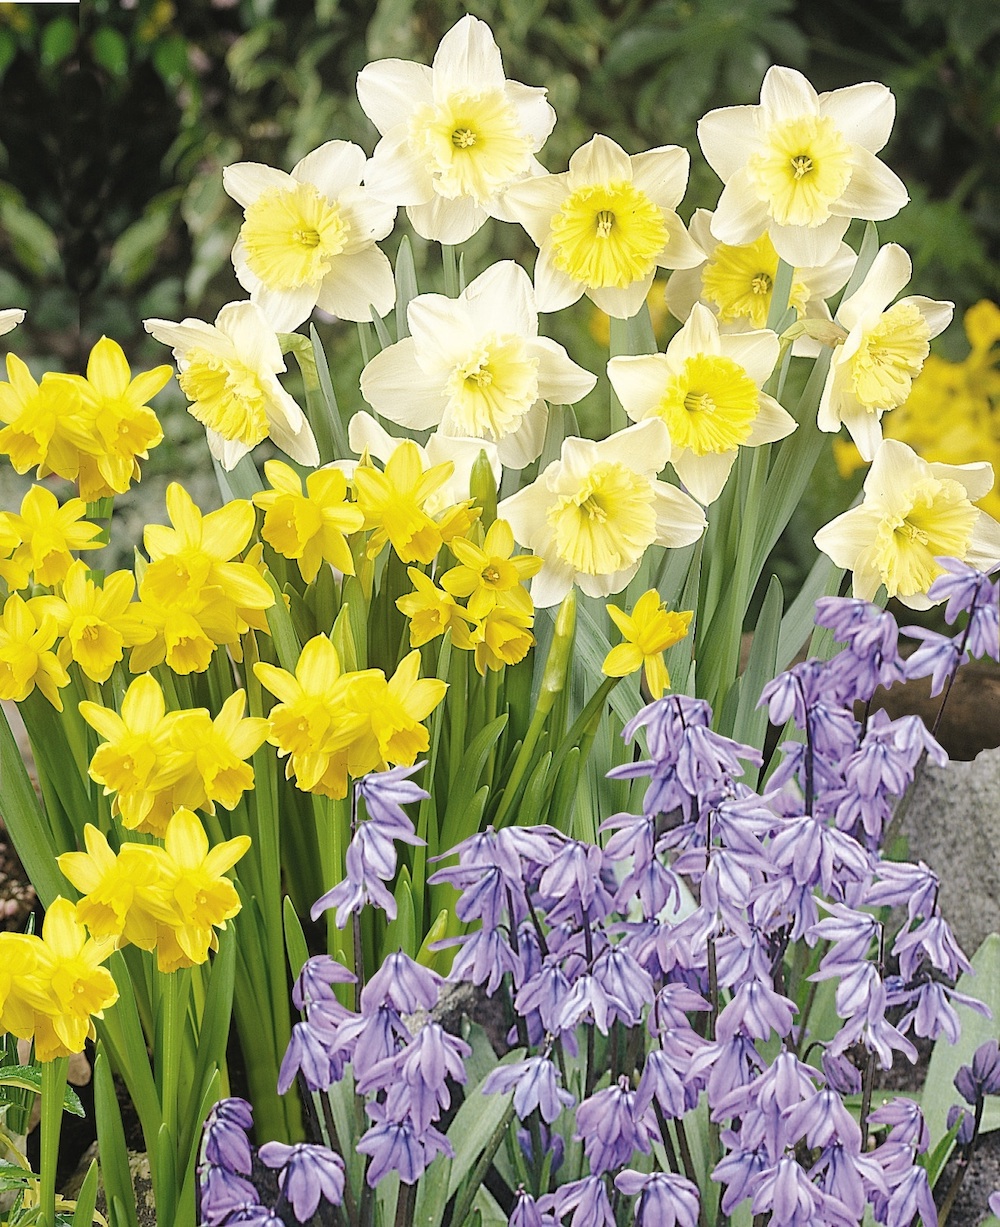 Daffodils and Siberian squill, deer proof spring bulbs